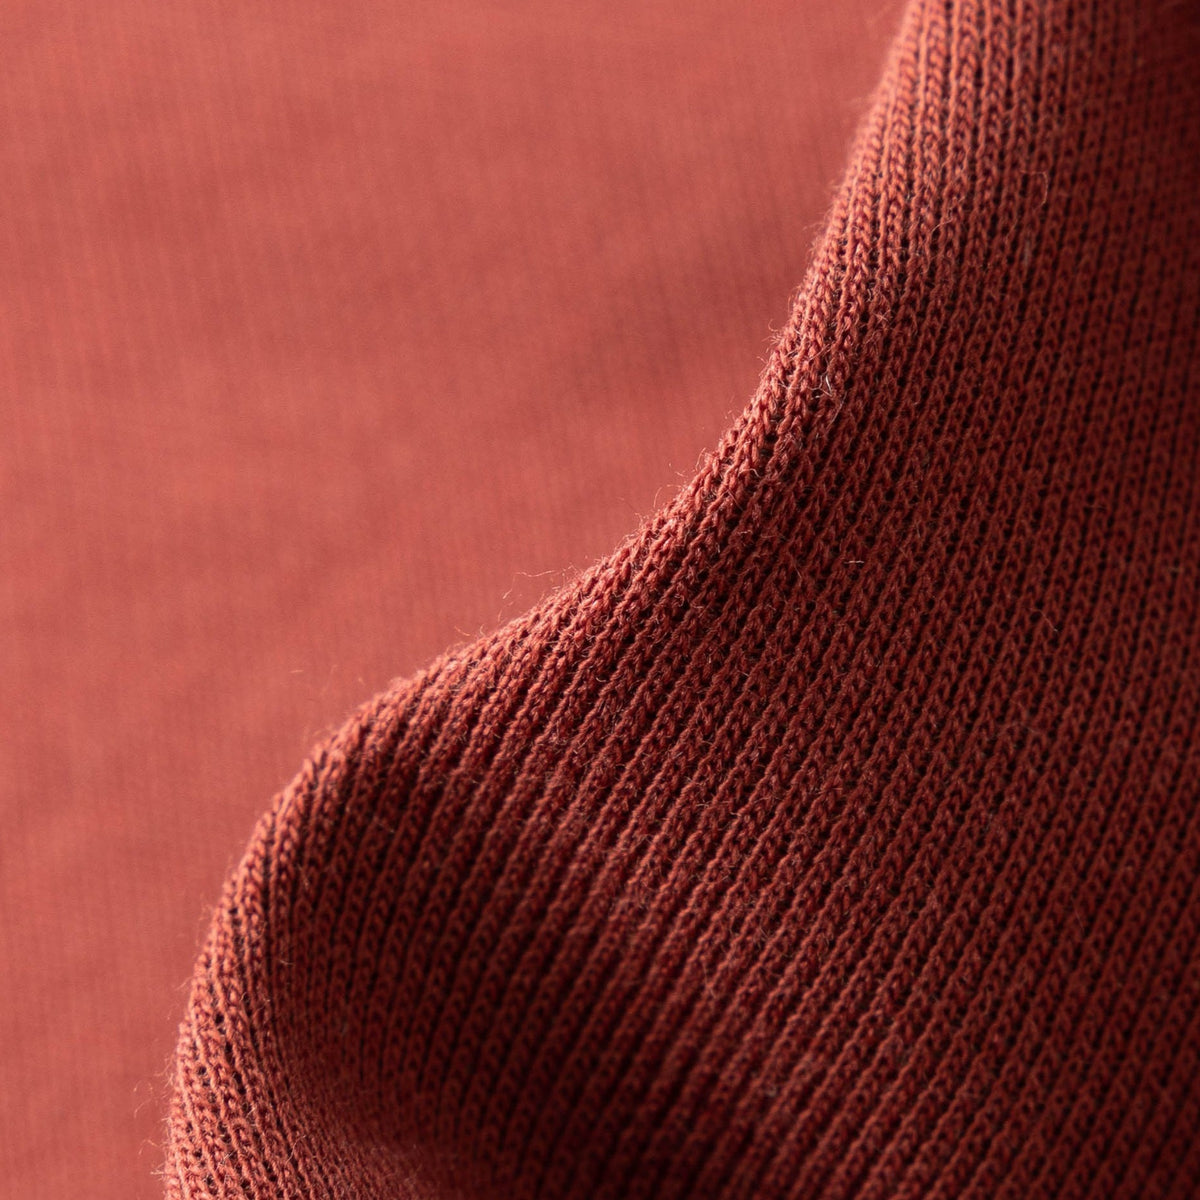 Silver Knit Fabric in Apple Red Color, which has excellet EMF shielding performance while maintian the  softness and asethical looking just like regular fabric